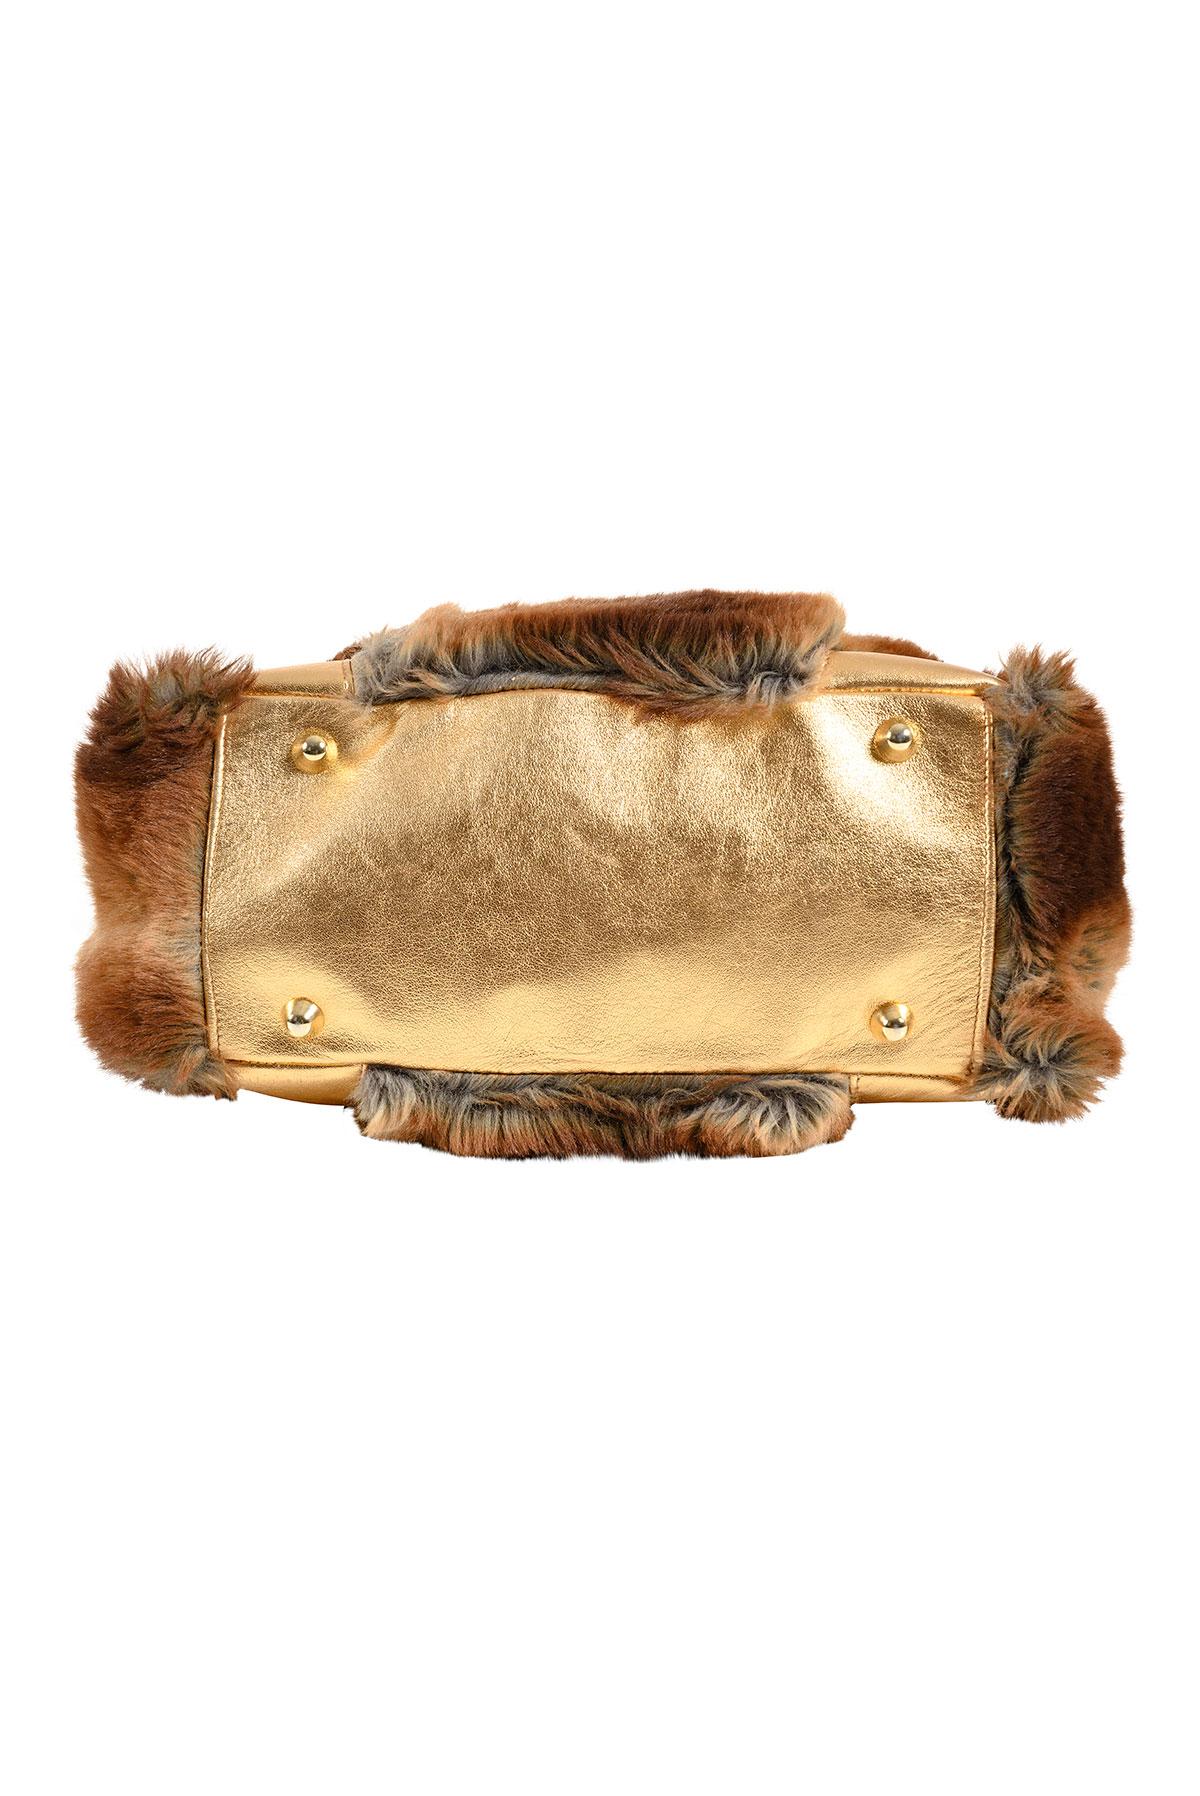 VIVIENNE WESTWOOD FW 95 Fake Fur Bag In Good Condition In Milano, MILANO